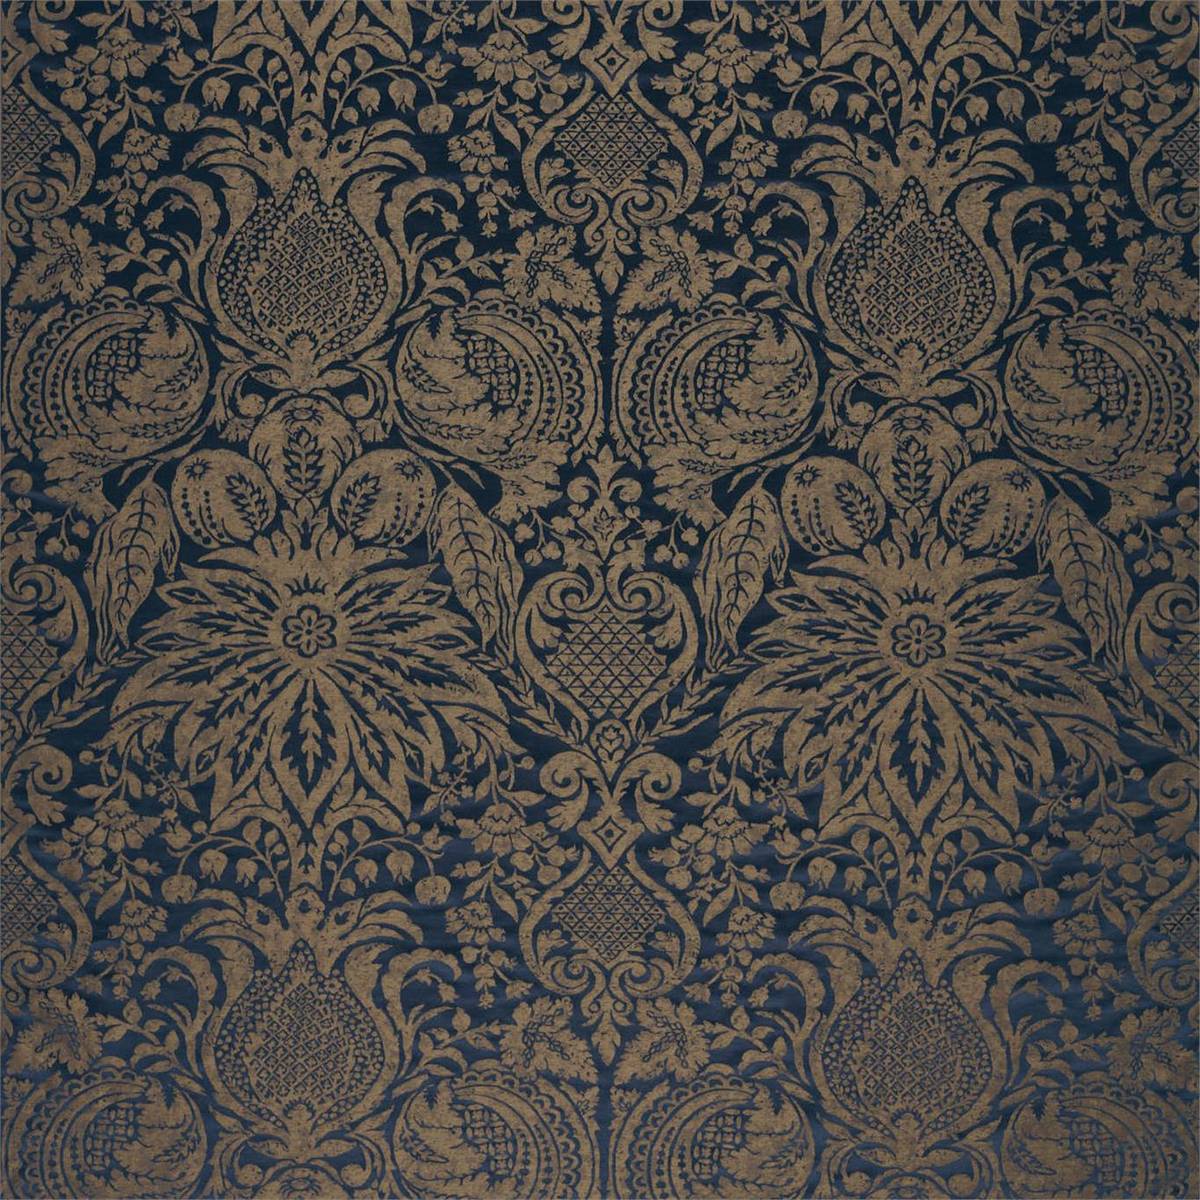 Mitford Weave Prussian Copper Fabric by Zoffany